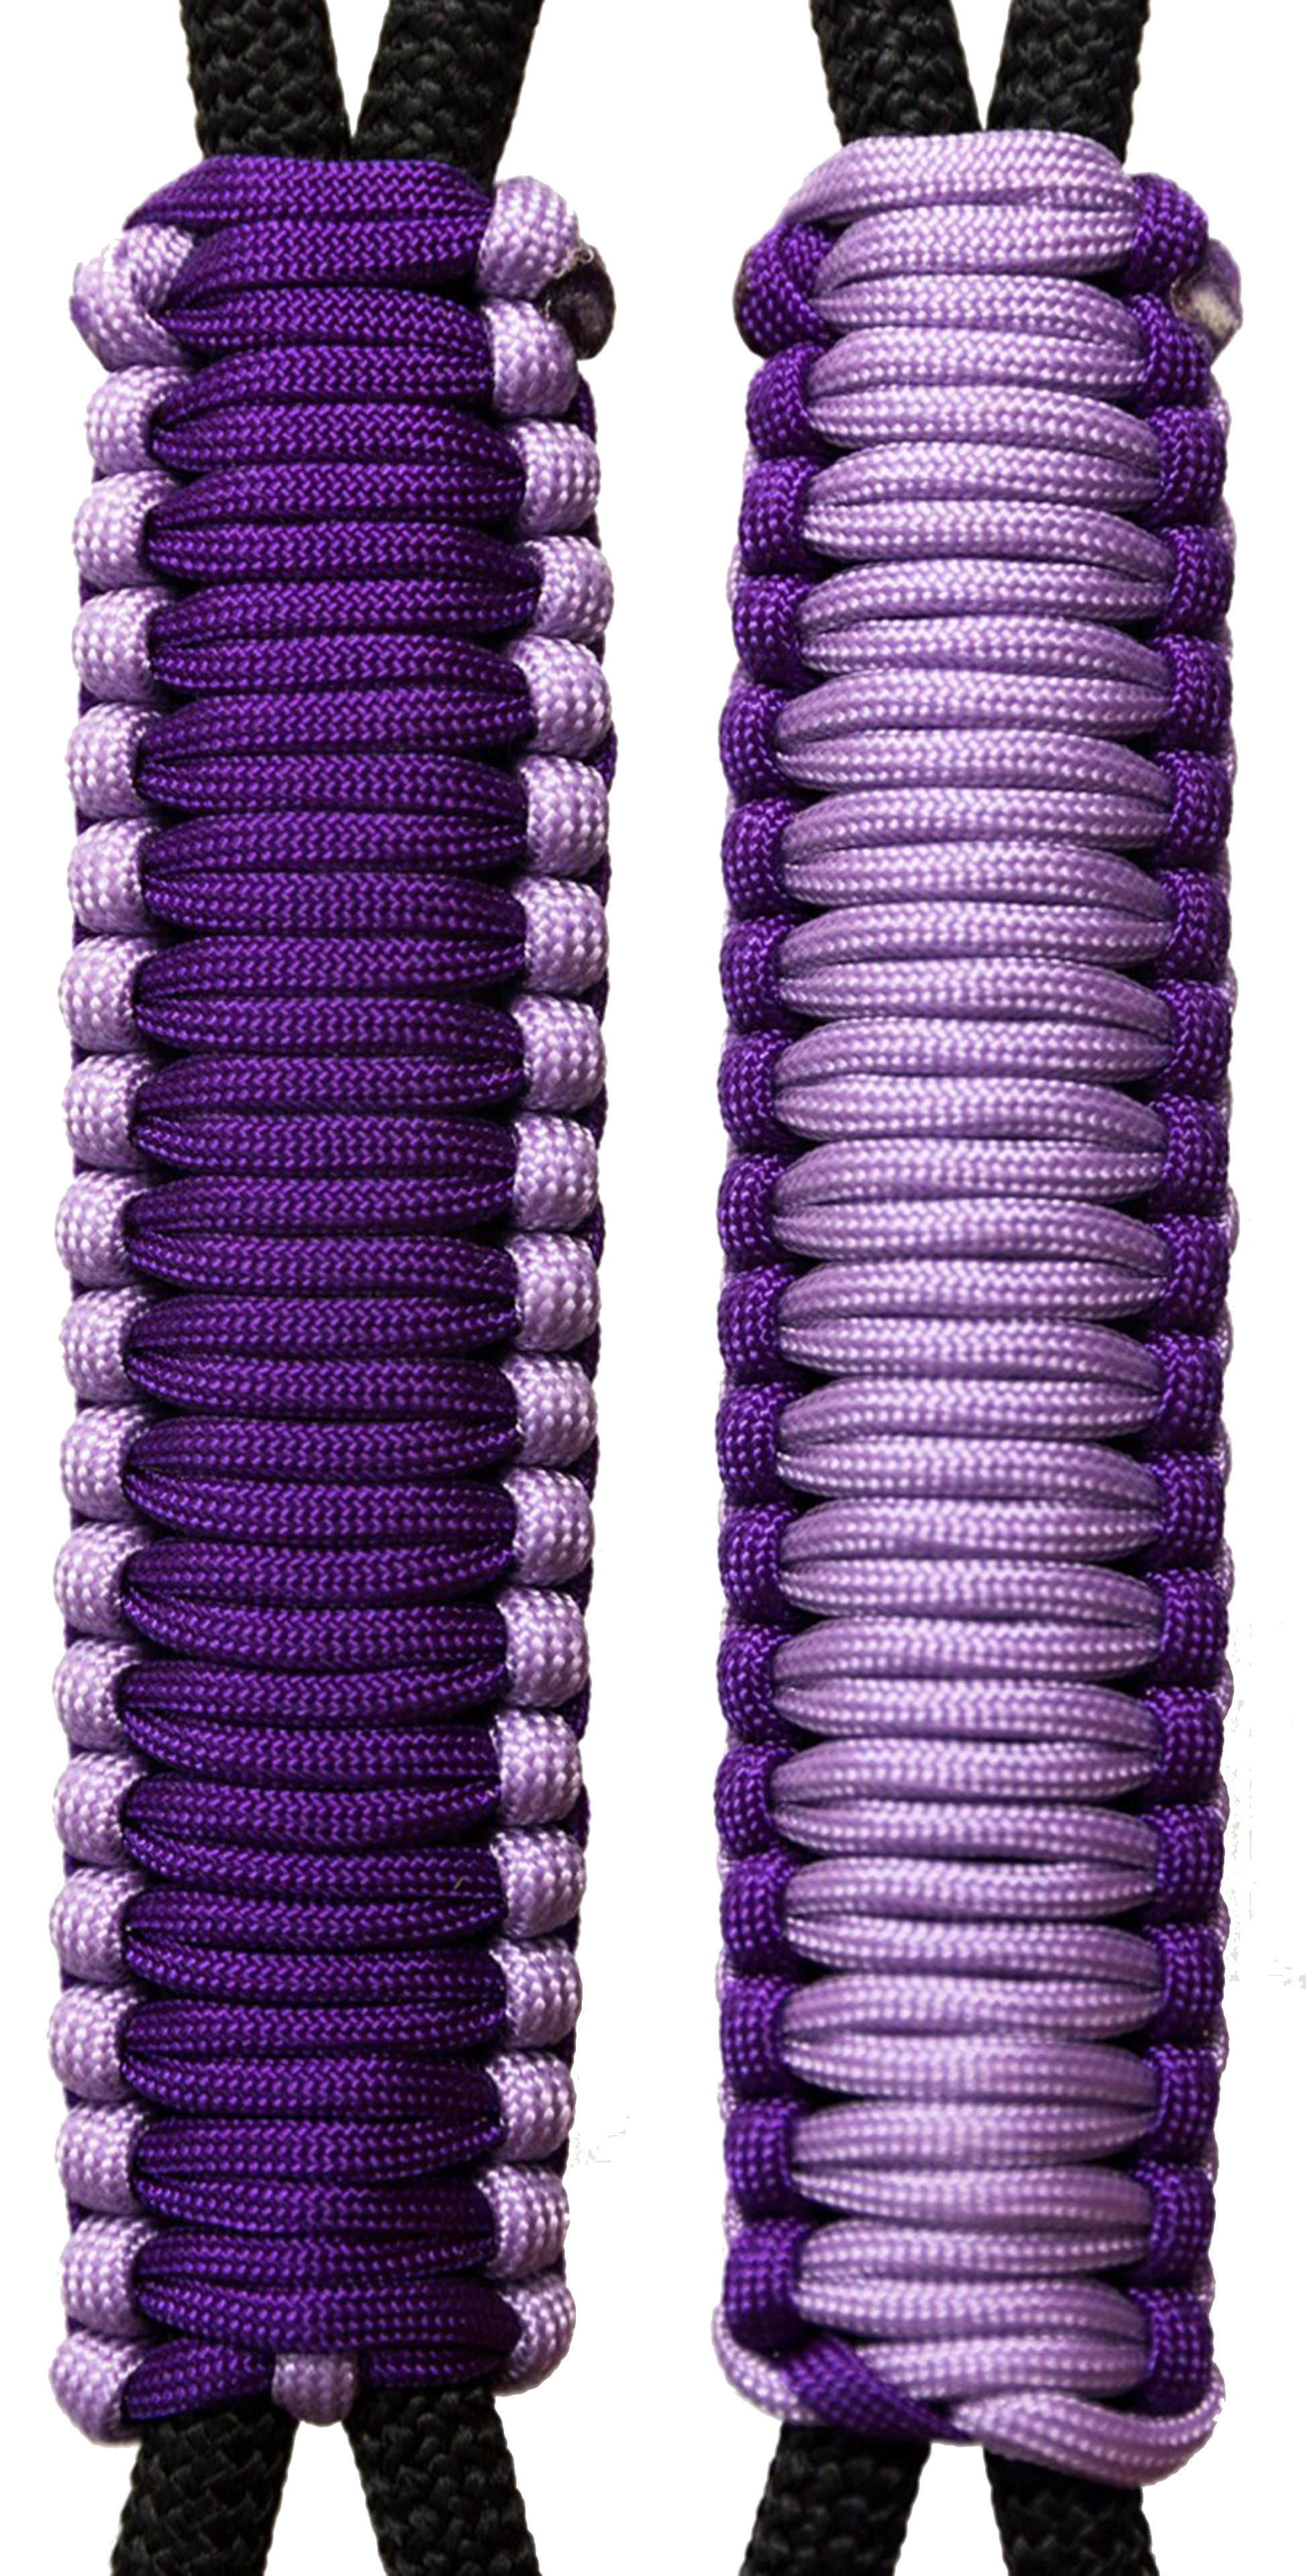 Purple & Lavender C024C025 - Paracord Handmade Handles for Stainless Steel Tumblers - Made in USA!